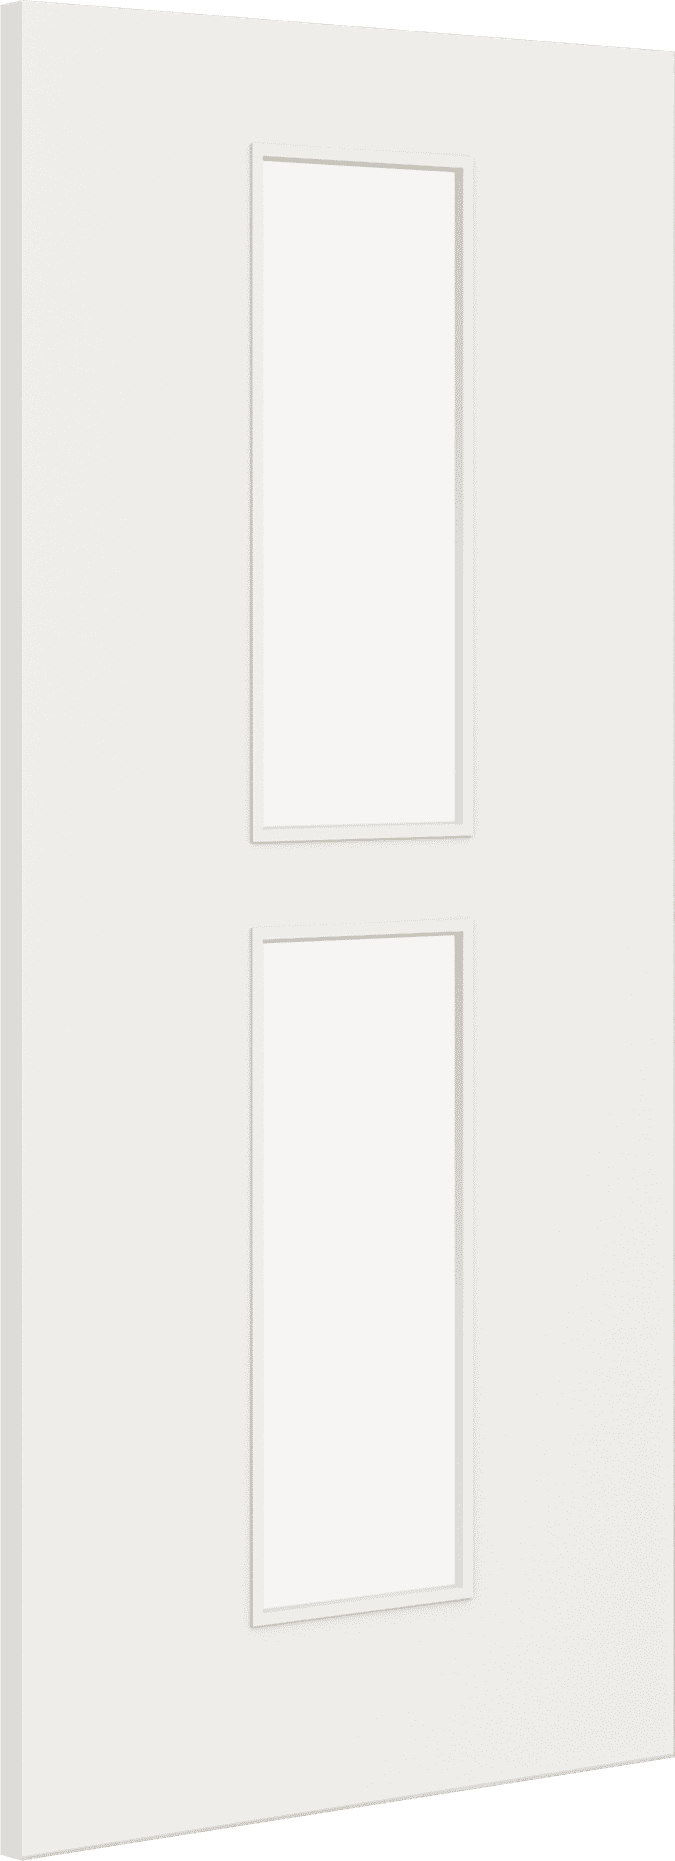 2040mm x 826mm x 44mm Architectural Paint Grade White 12 Clear Glazed Fire Door Blank